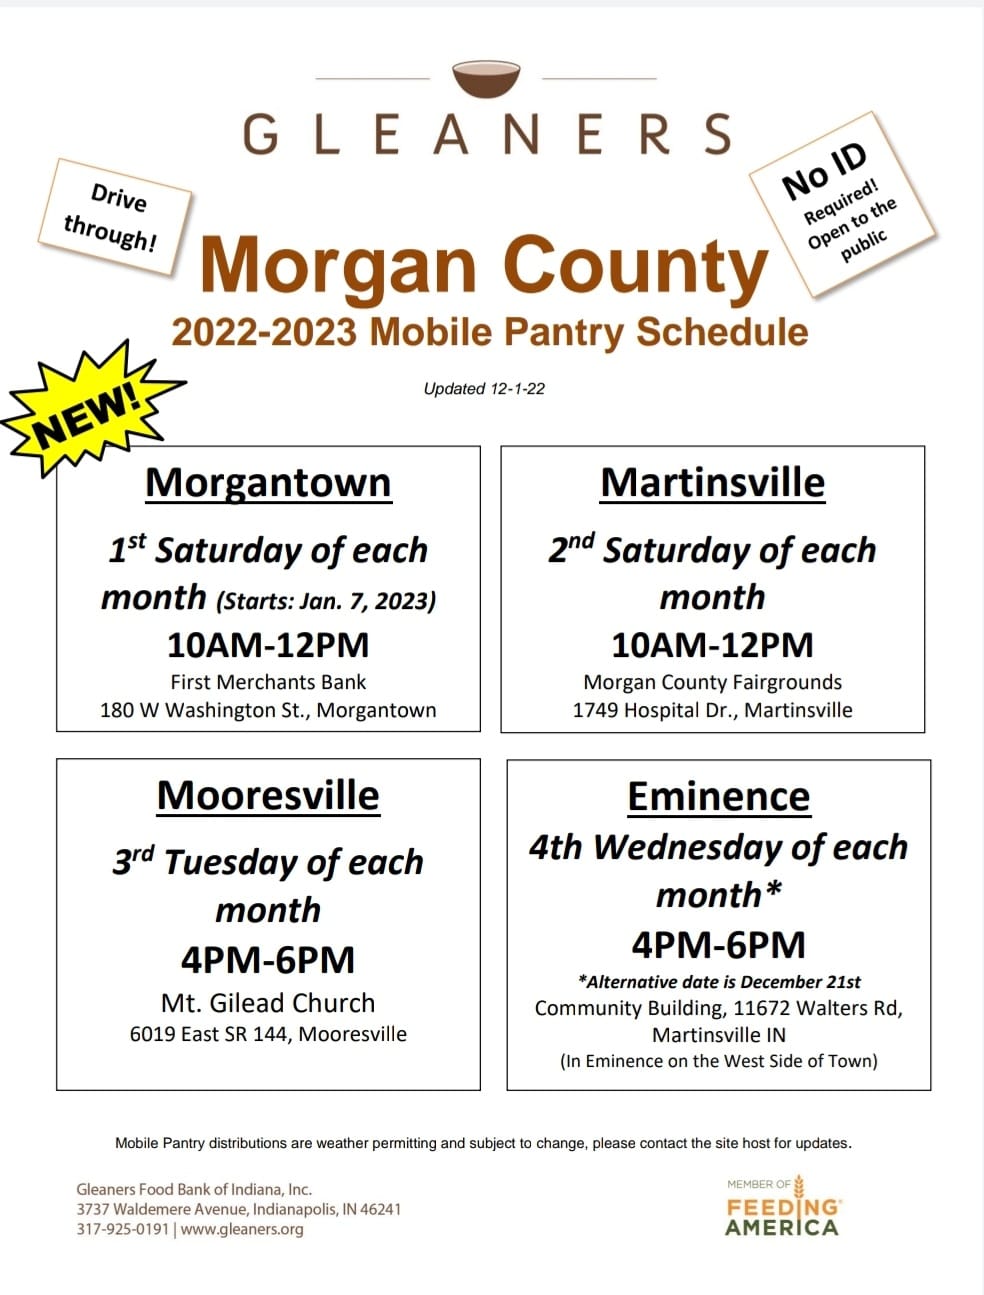 Gleaners releases 2023 schedule for the County Mobile Pantry